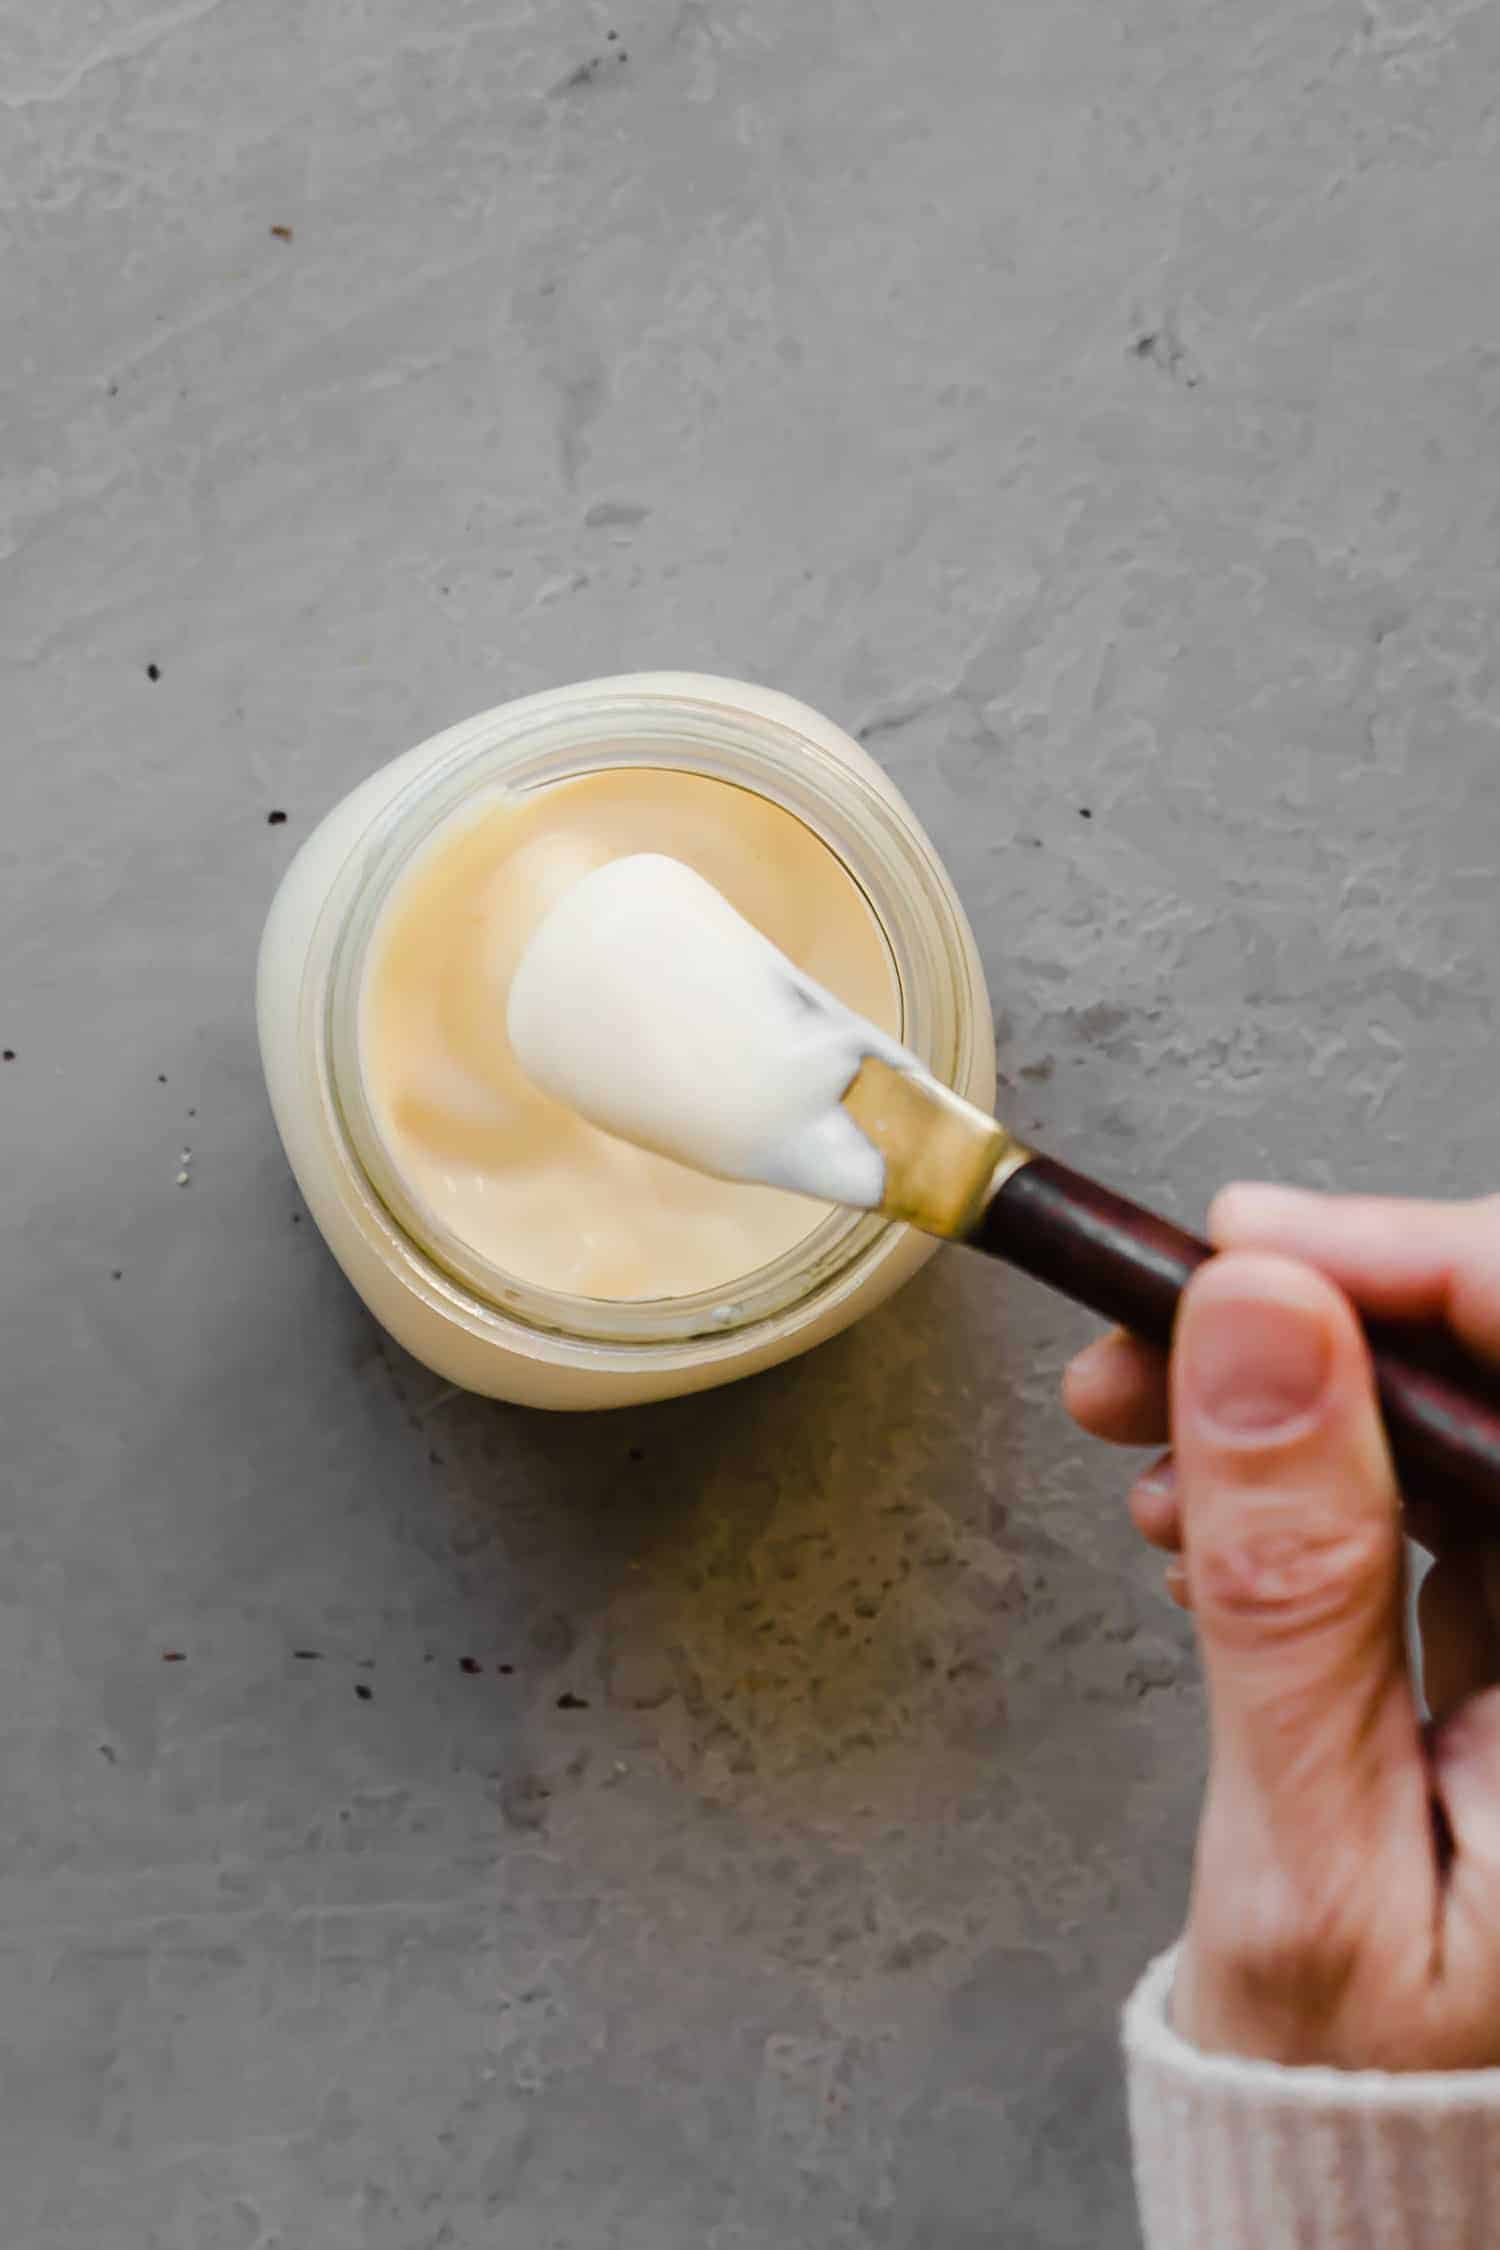 scooping homemade mayo out of a glass jar